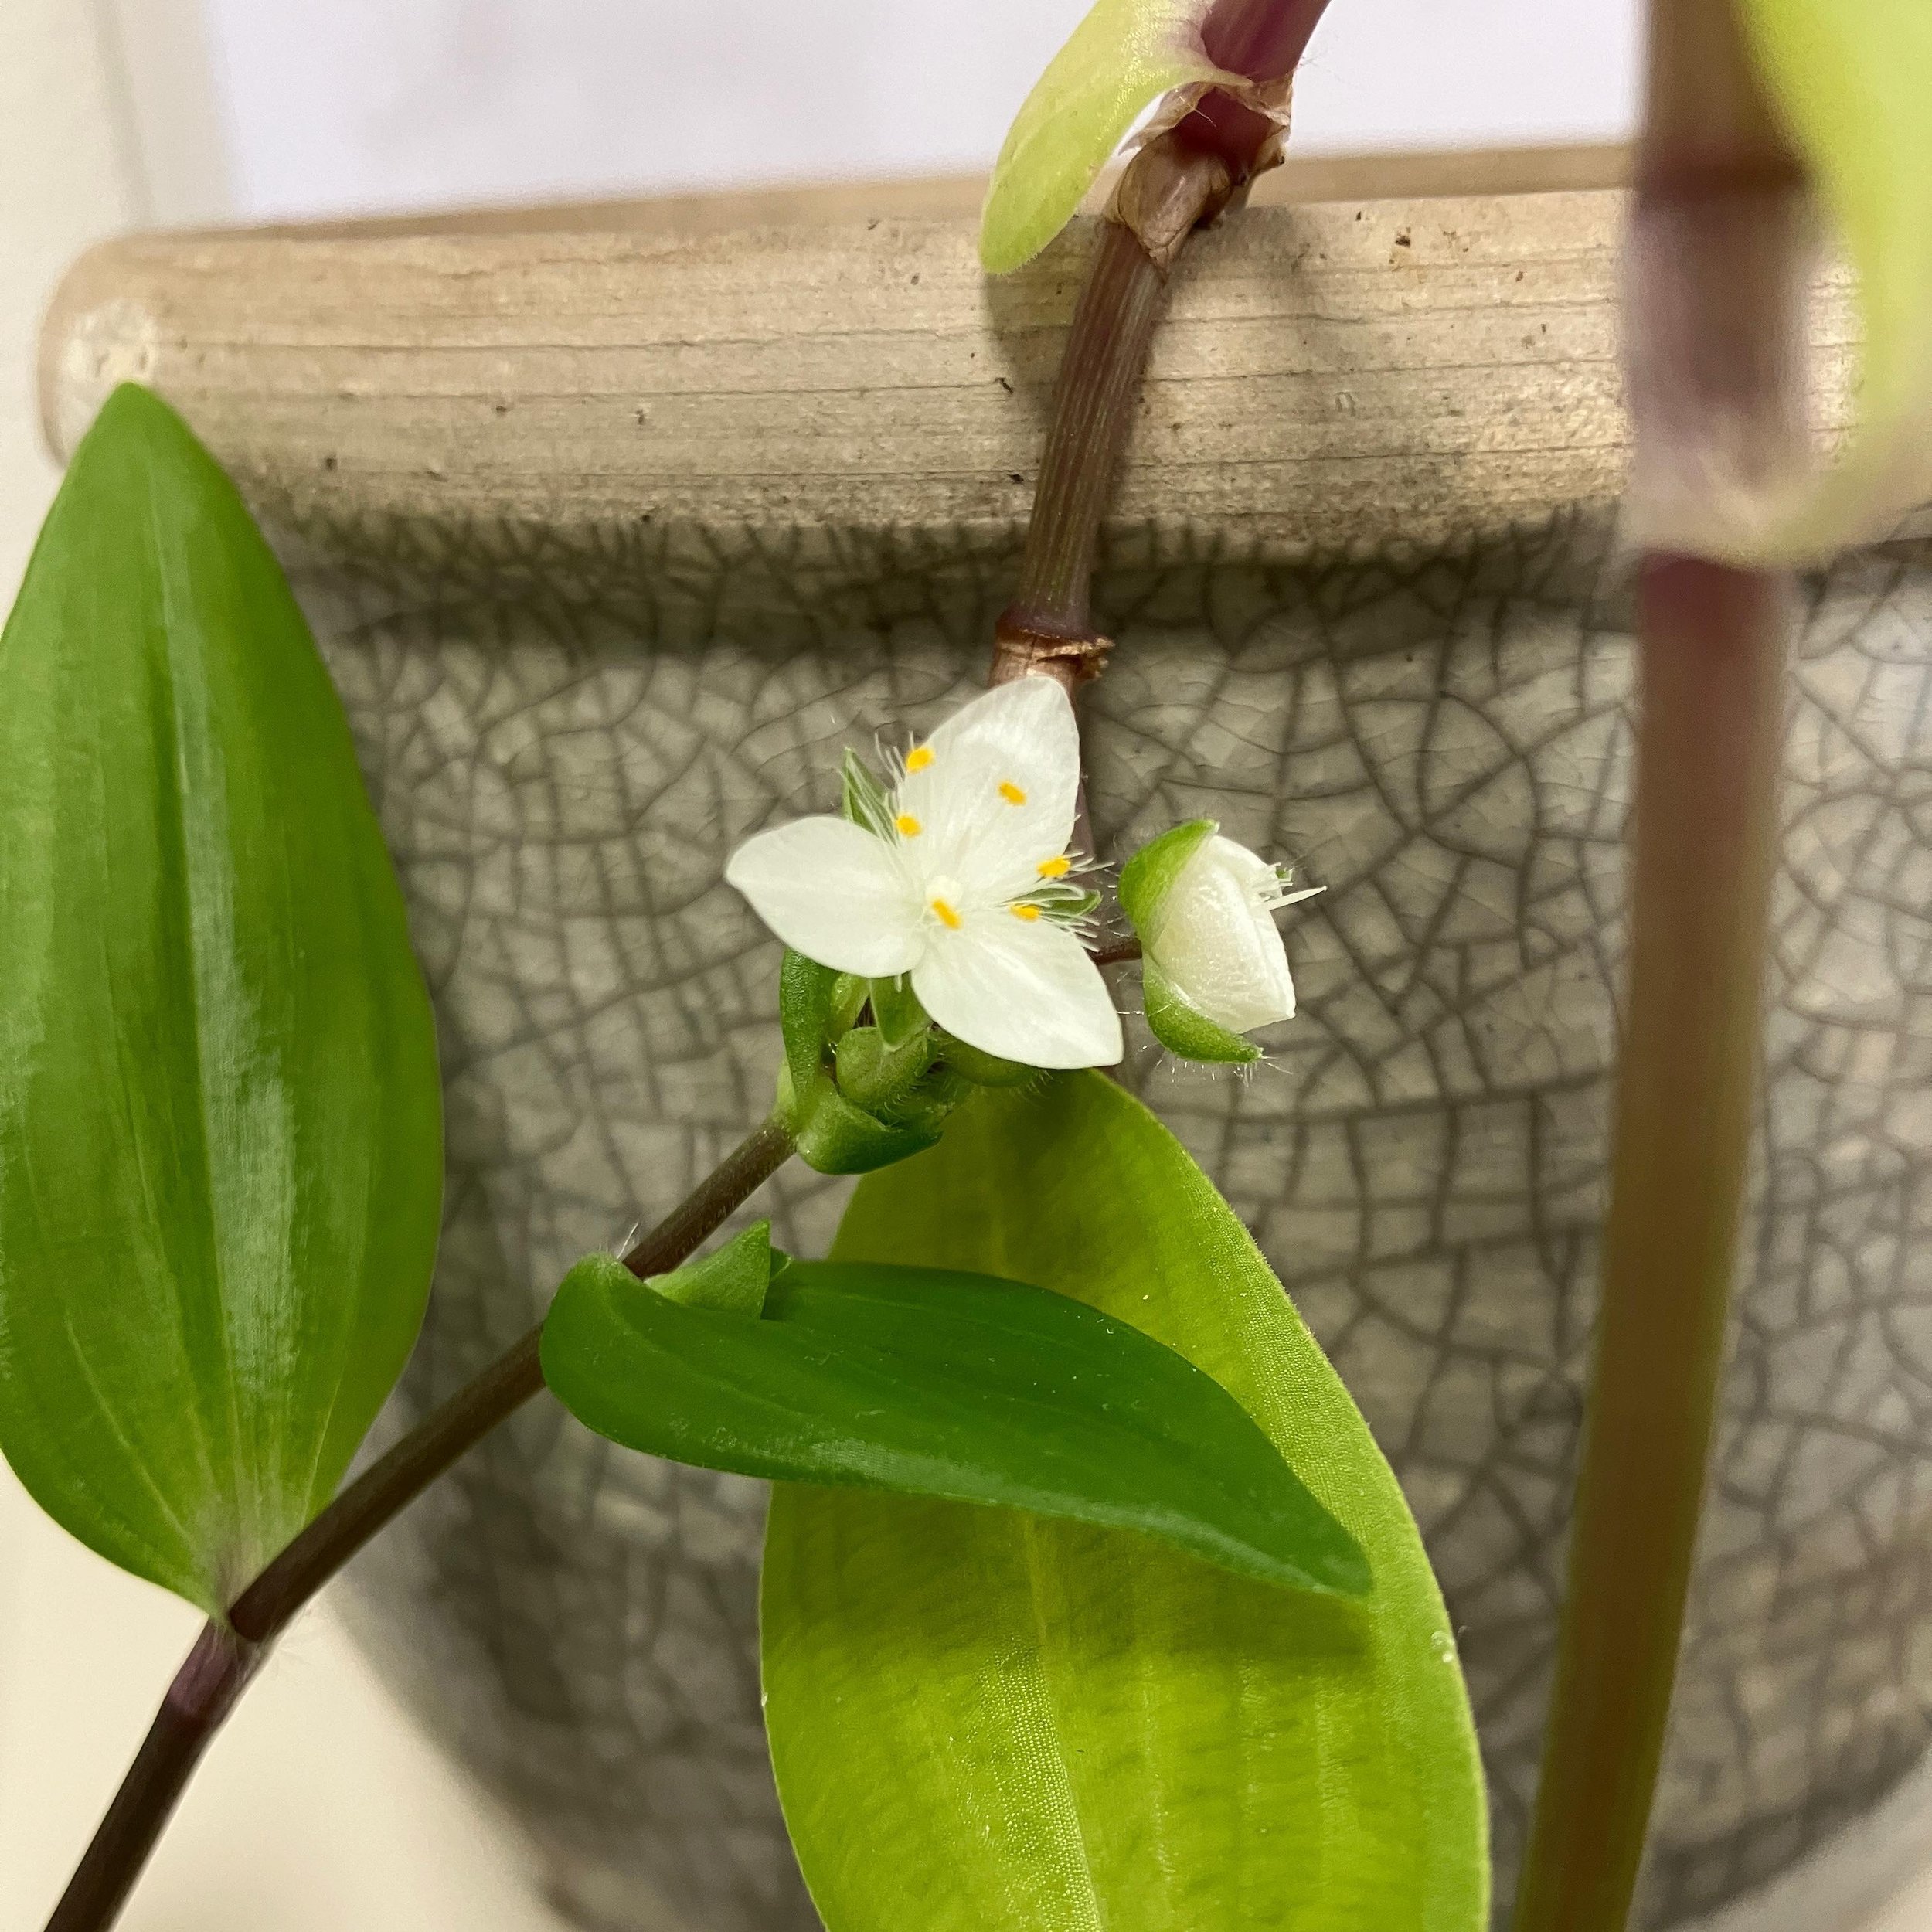 Happy Wednesday ✨

I&rsquo;ve just noticed this little flower has emerged on one of the office plants, and it&rsquo;s made me smile 🌼

If today feels difficult, I hope this brightens your day a bit too, even if only for a moment 🛋

#HappyWednesday 